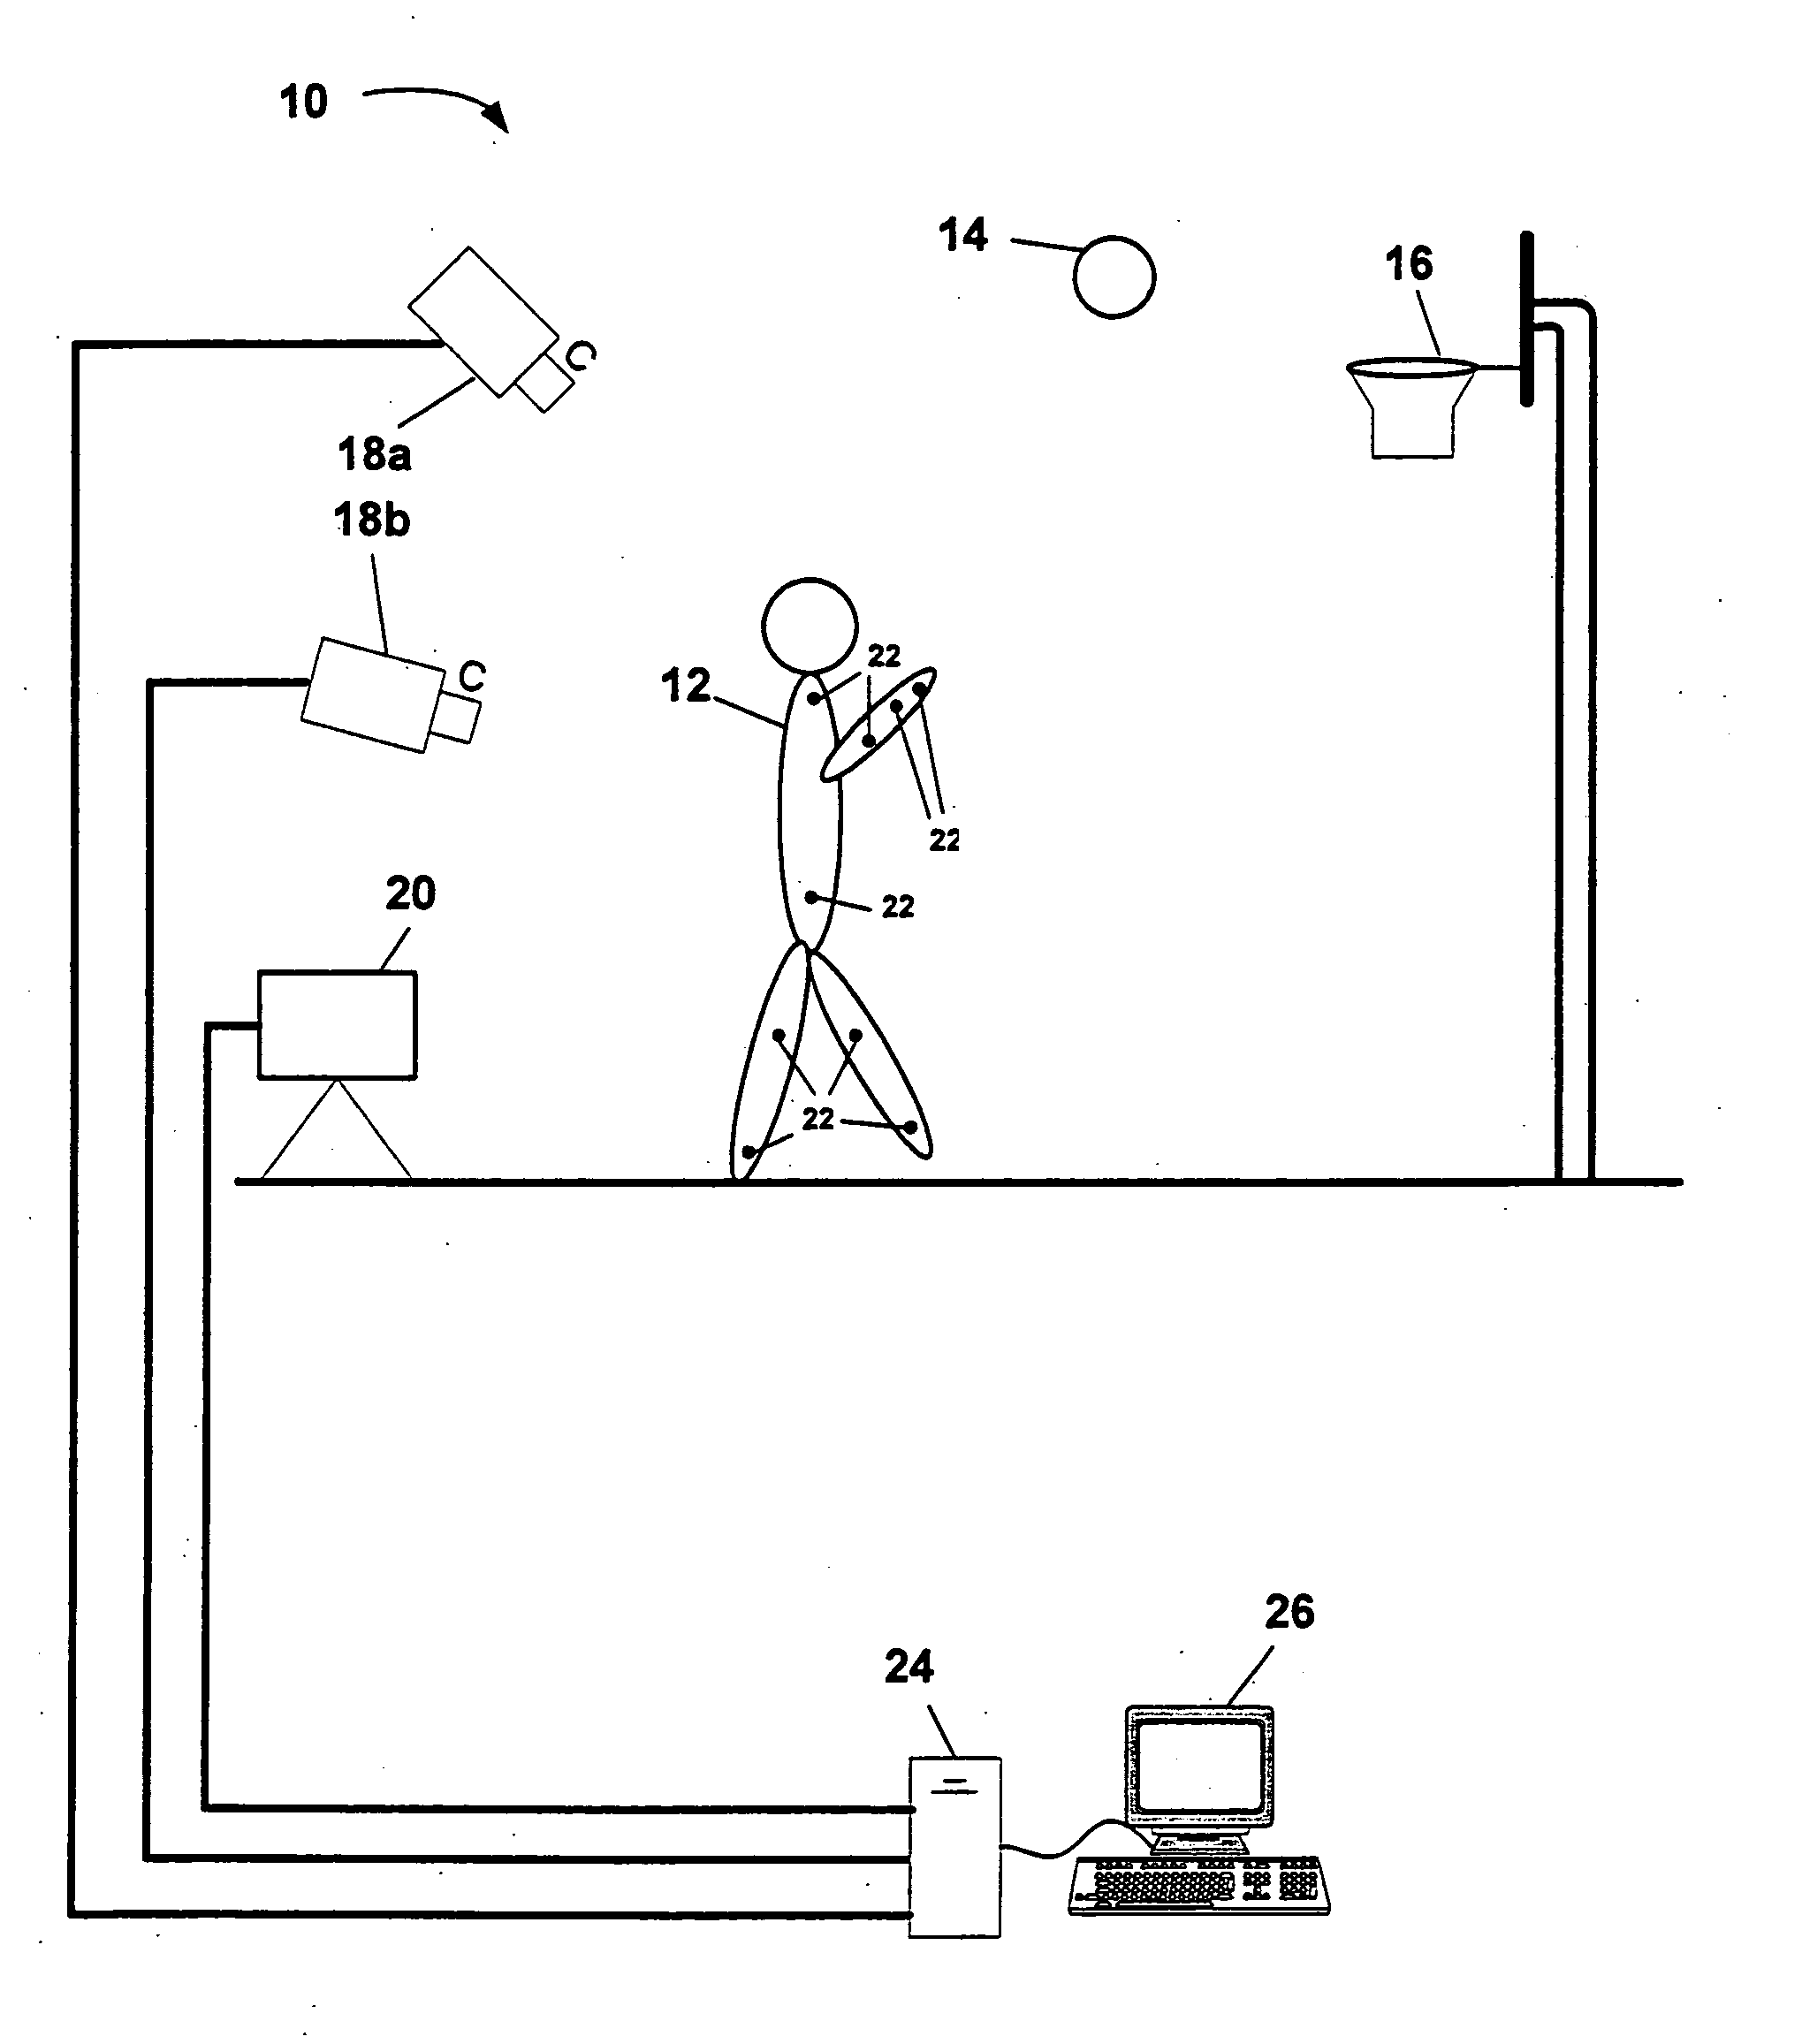 System and method for motion capture and analysis